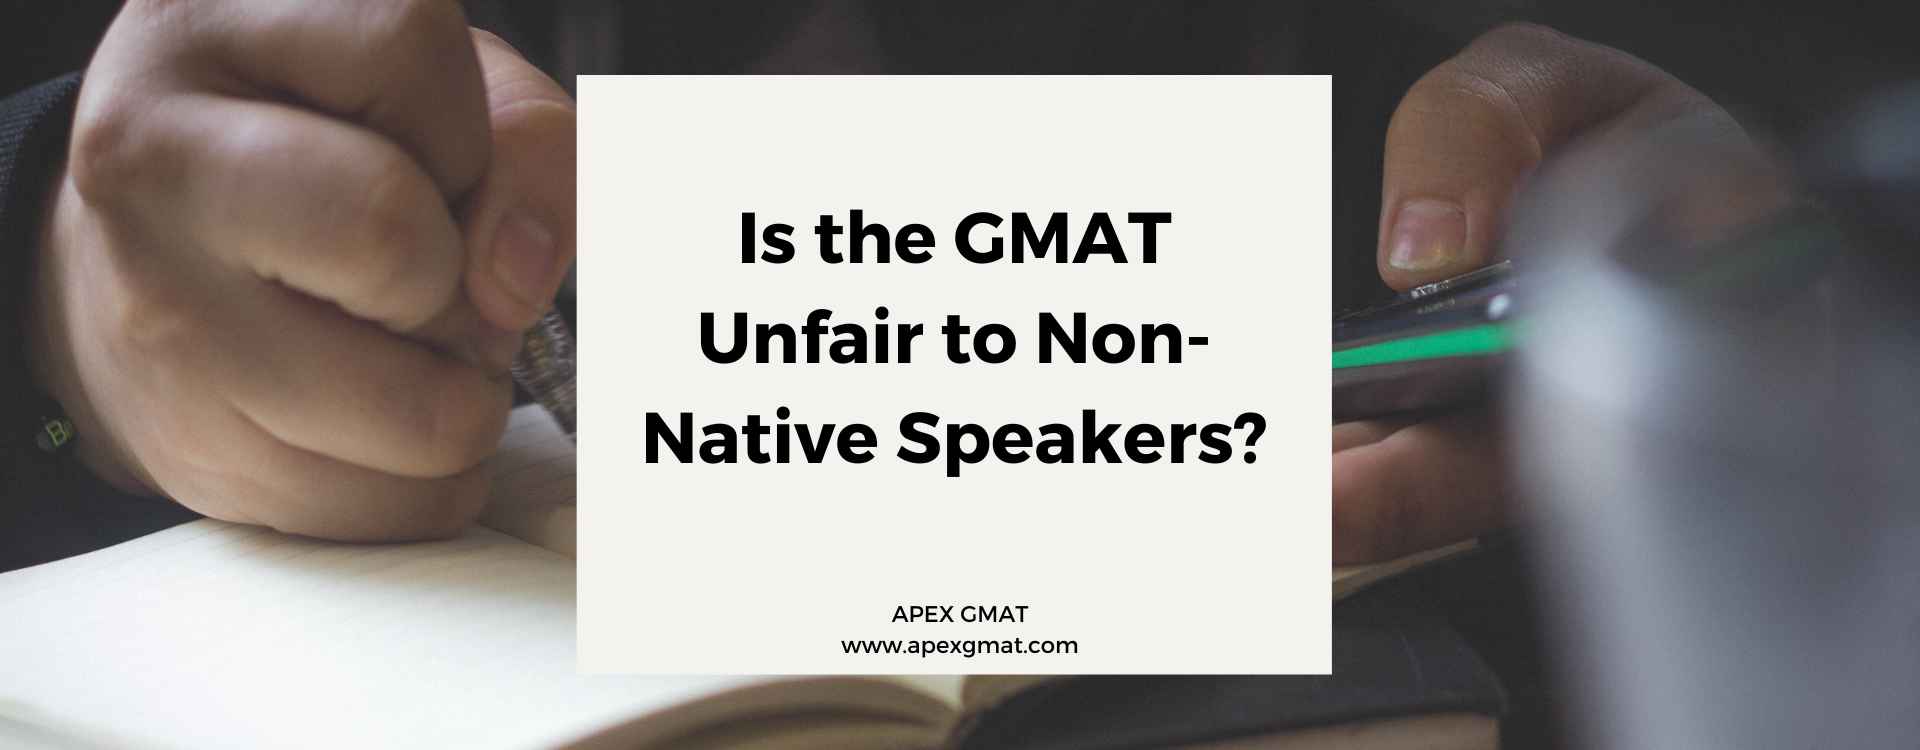 Is the GMAT Unfair to Non-Native Speakers?